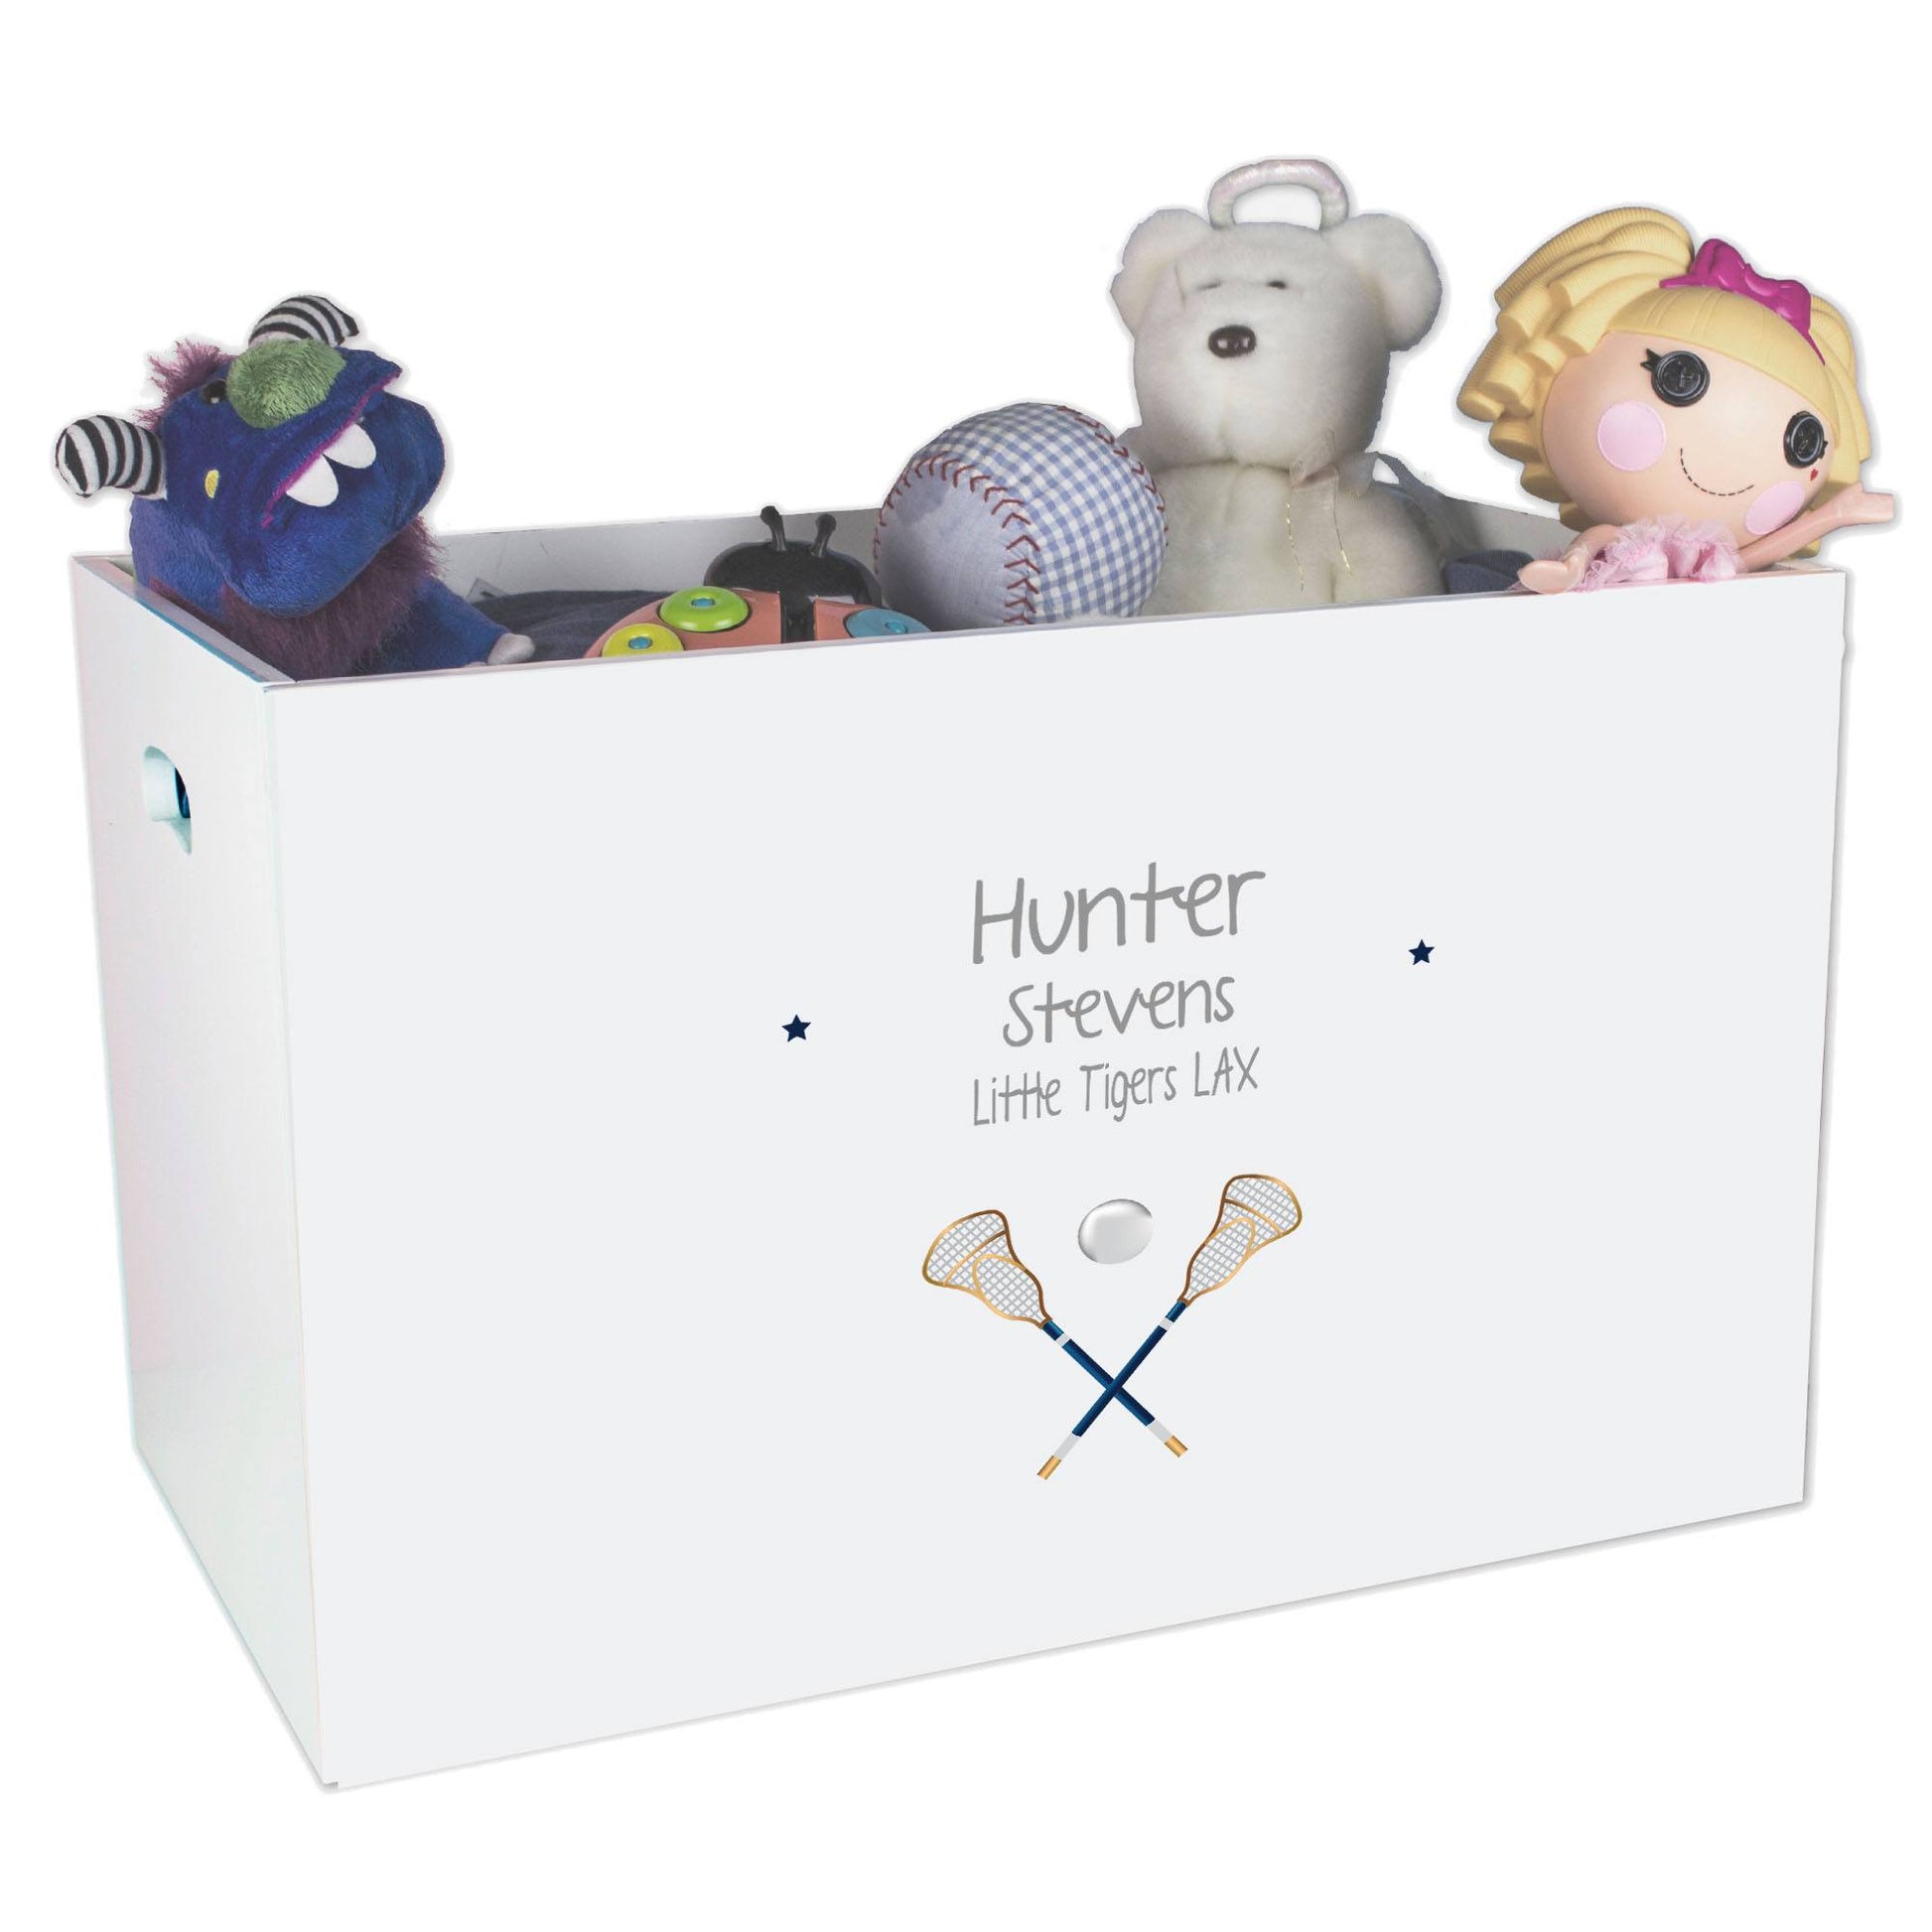 Open White Toy Box Bench with Lacrosse Sticks design